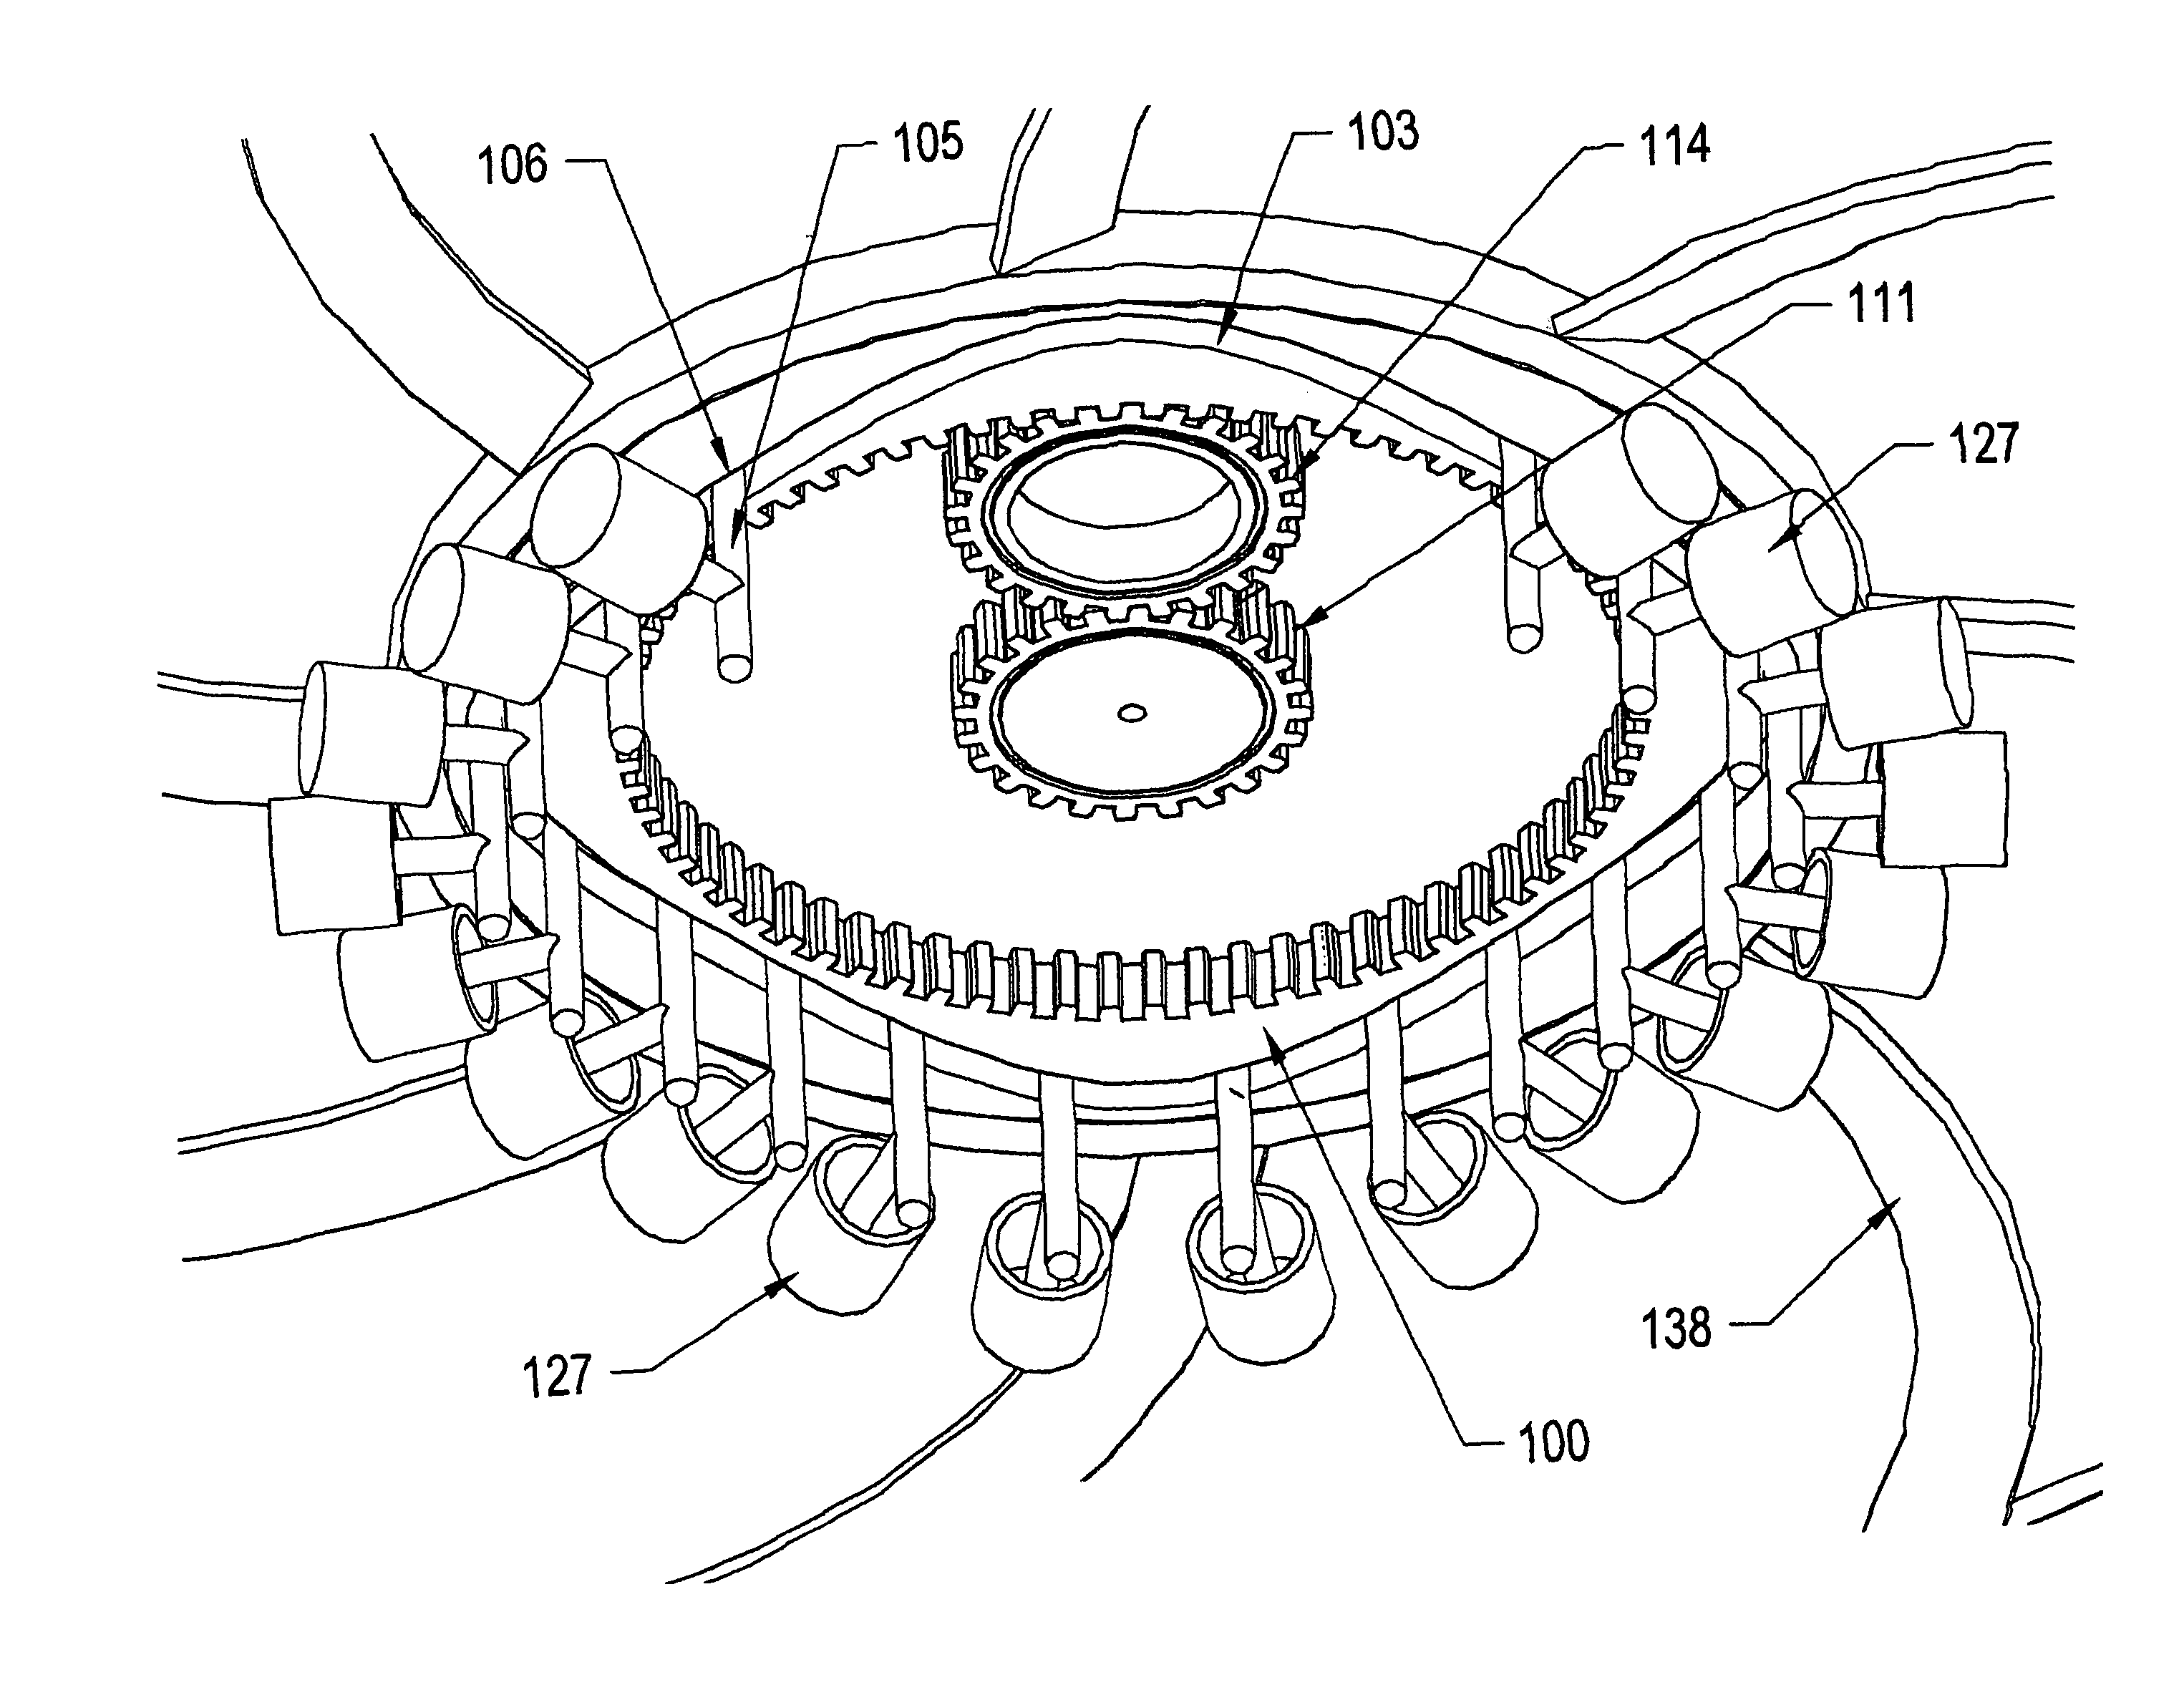 Saucer-shaped gyroscopically stabilized vertical take-off and landing aircraft